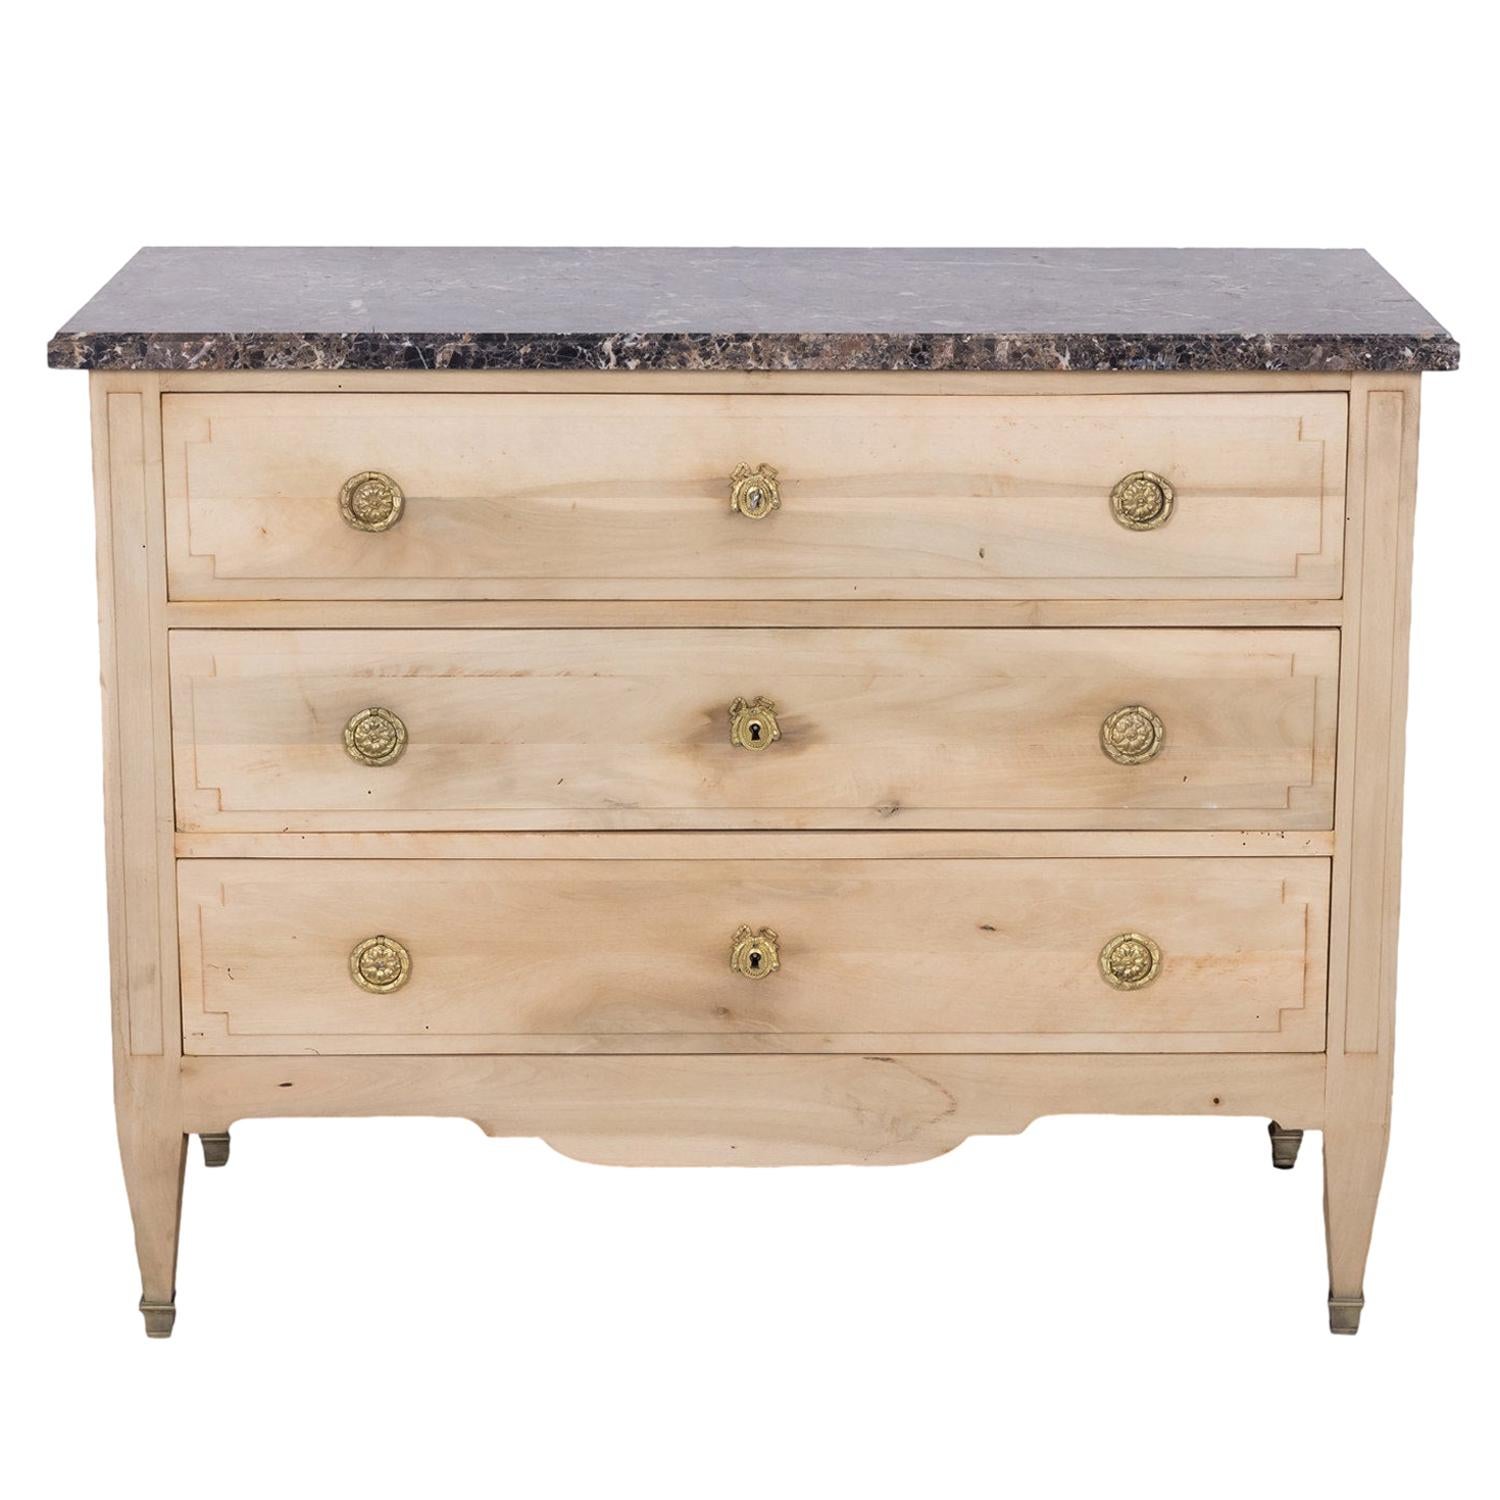 19th Century French Louis XVI Style Bleached Three-Drawer Commode with Marble To